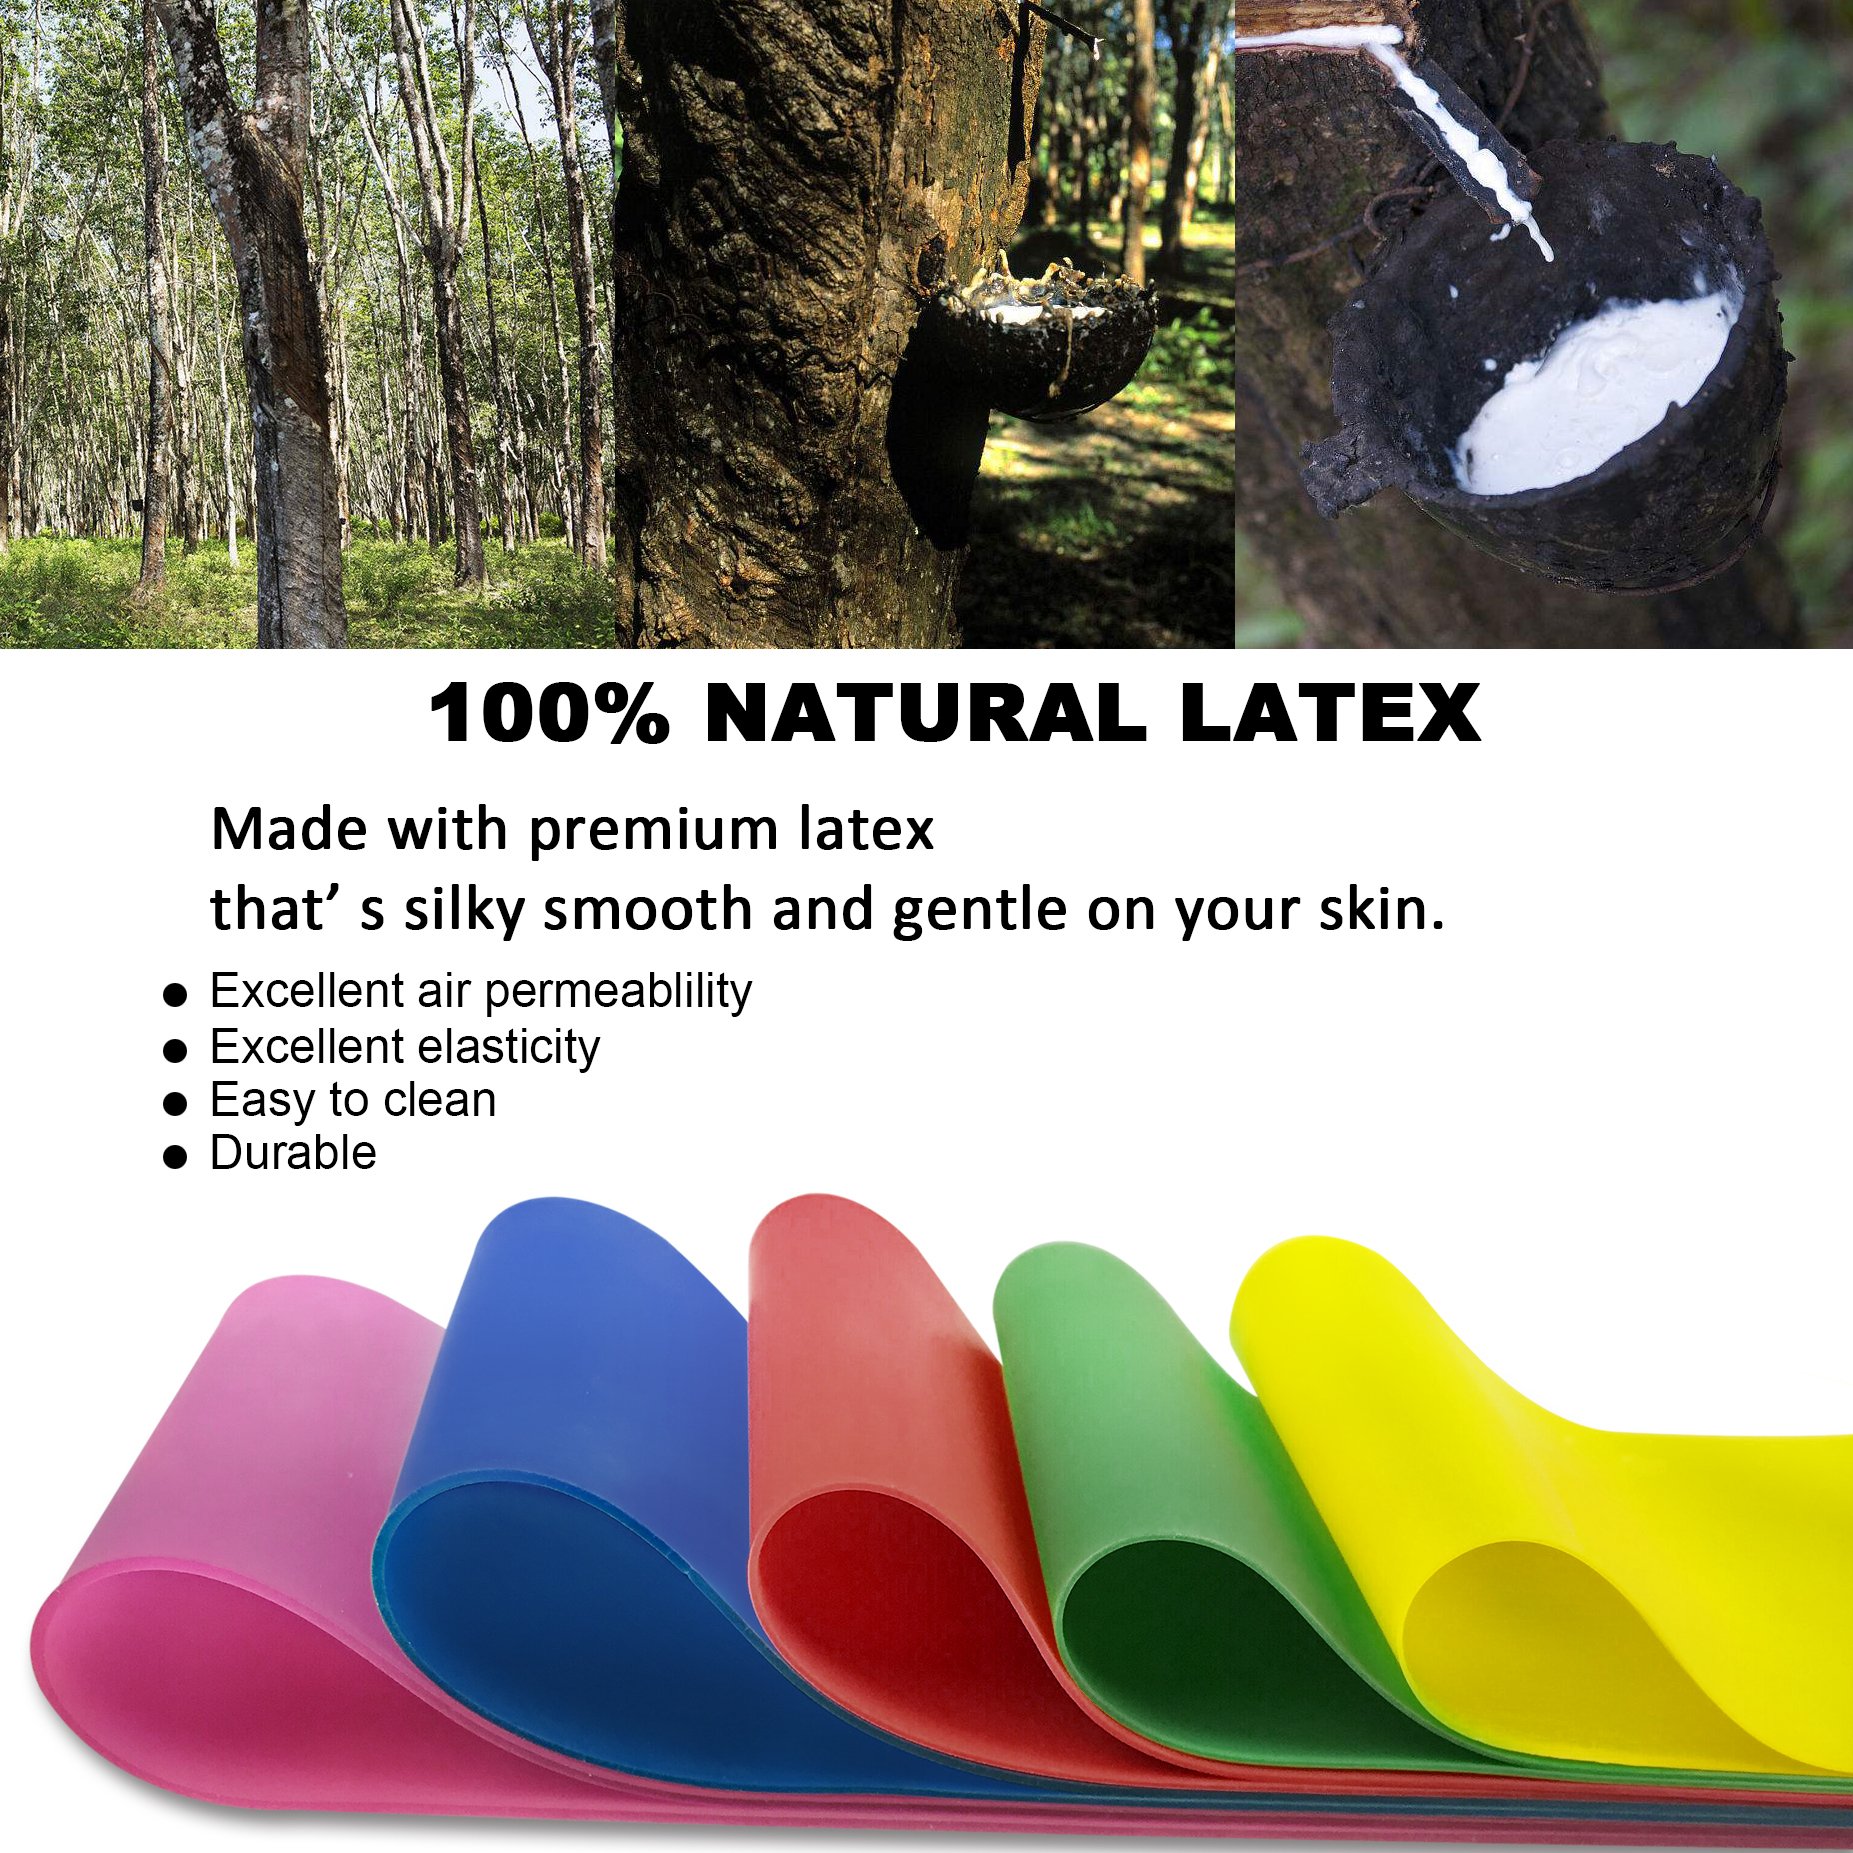 The Benefits of a Latex Resistance Band